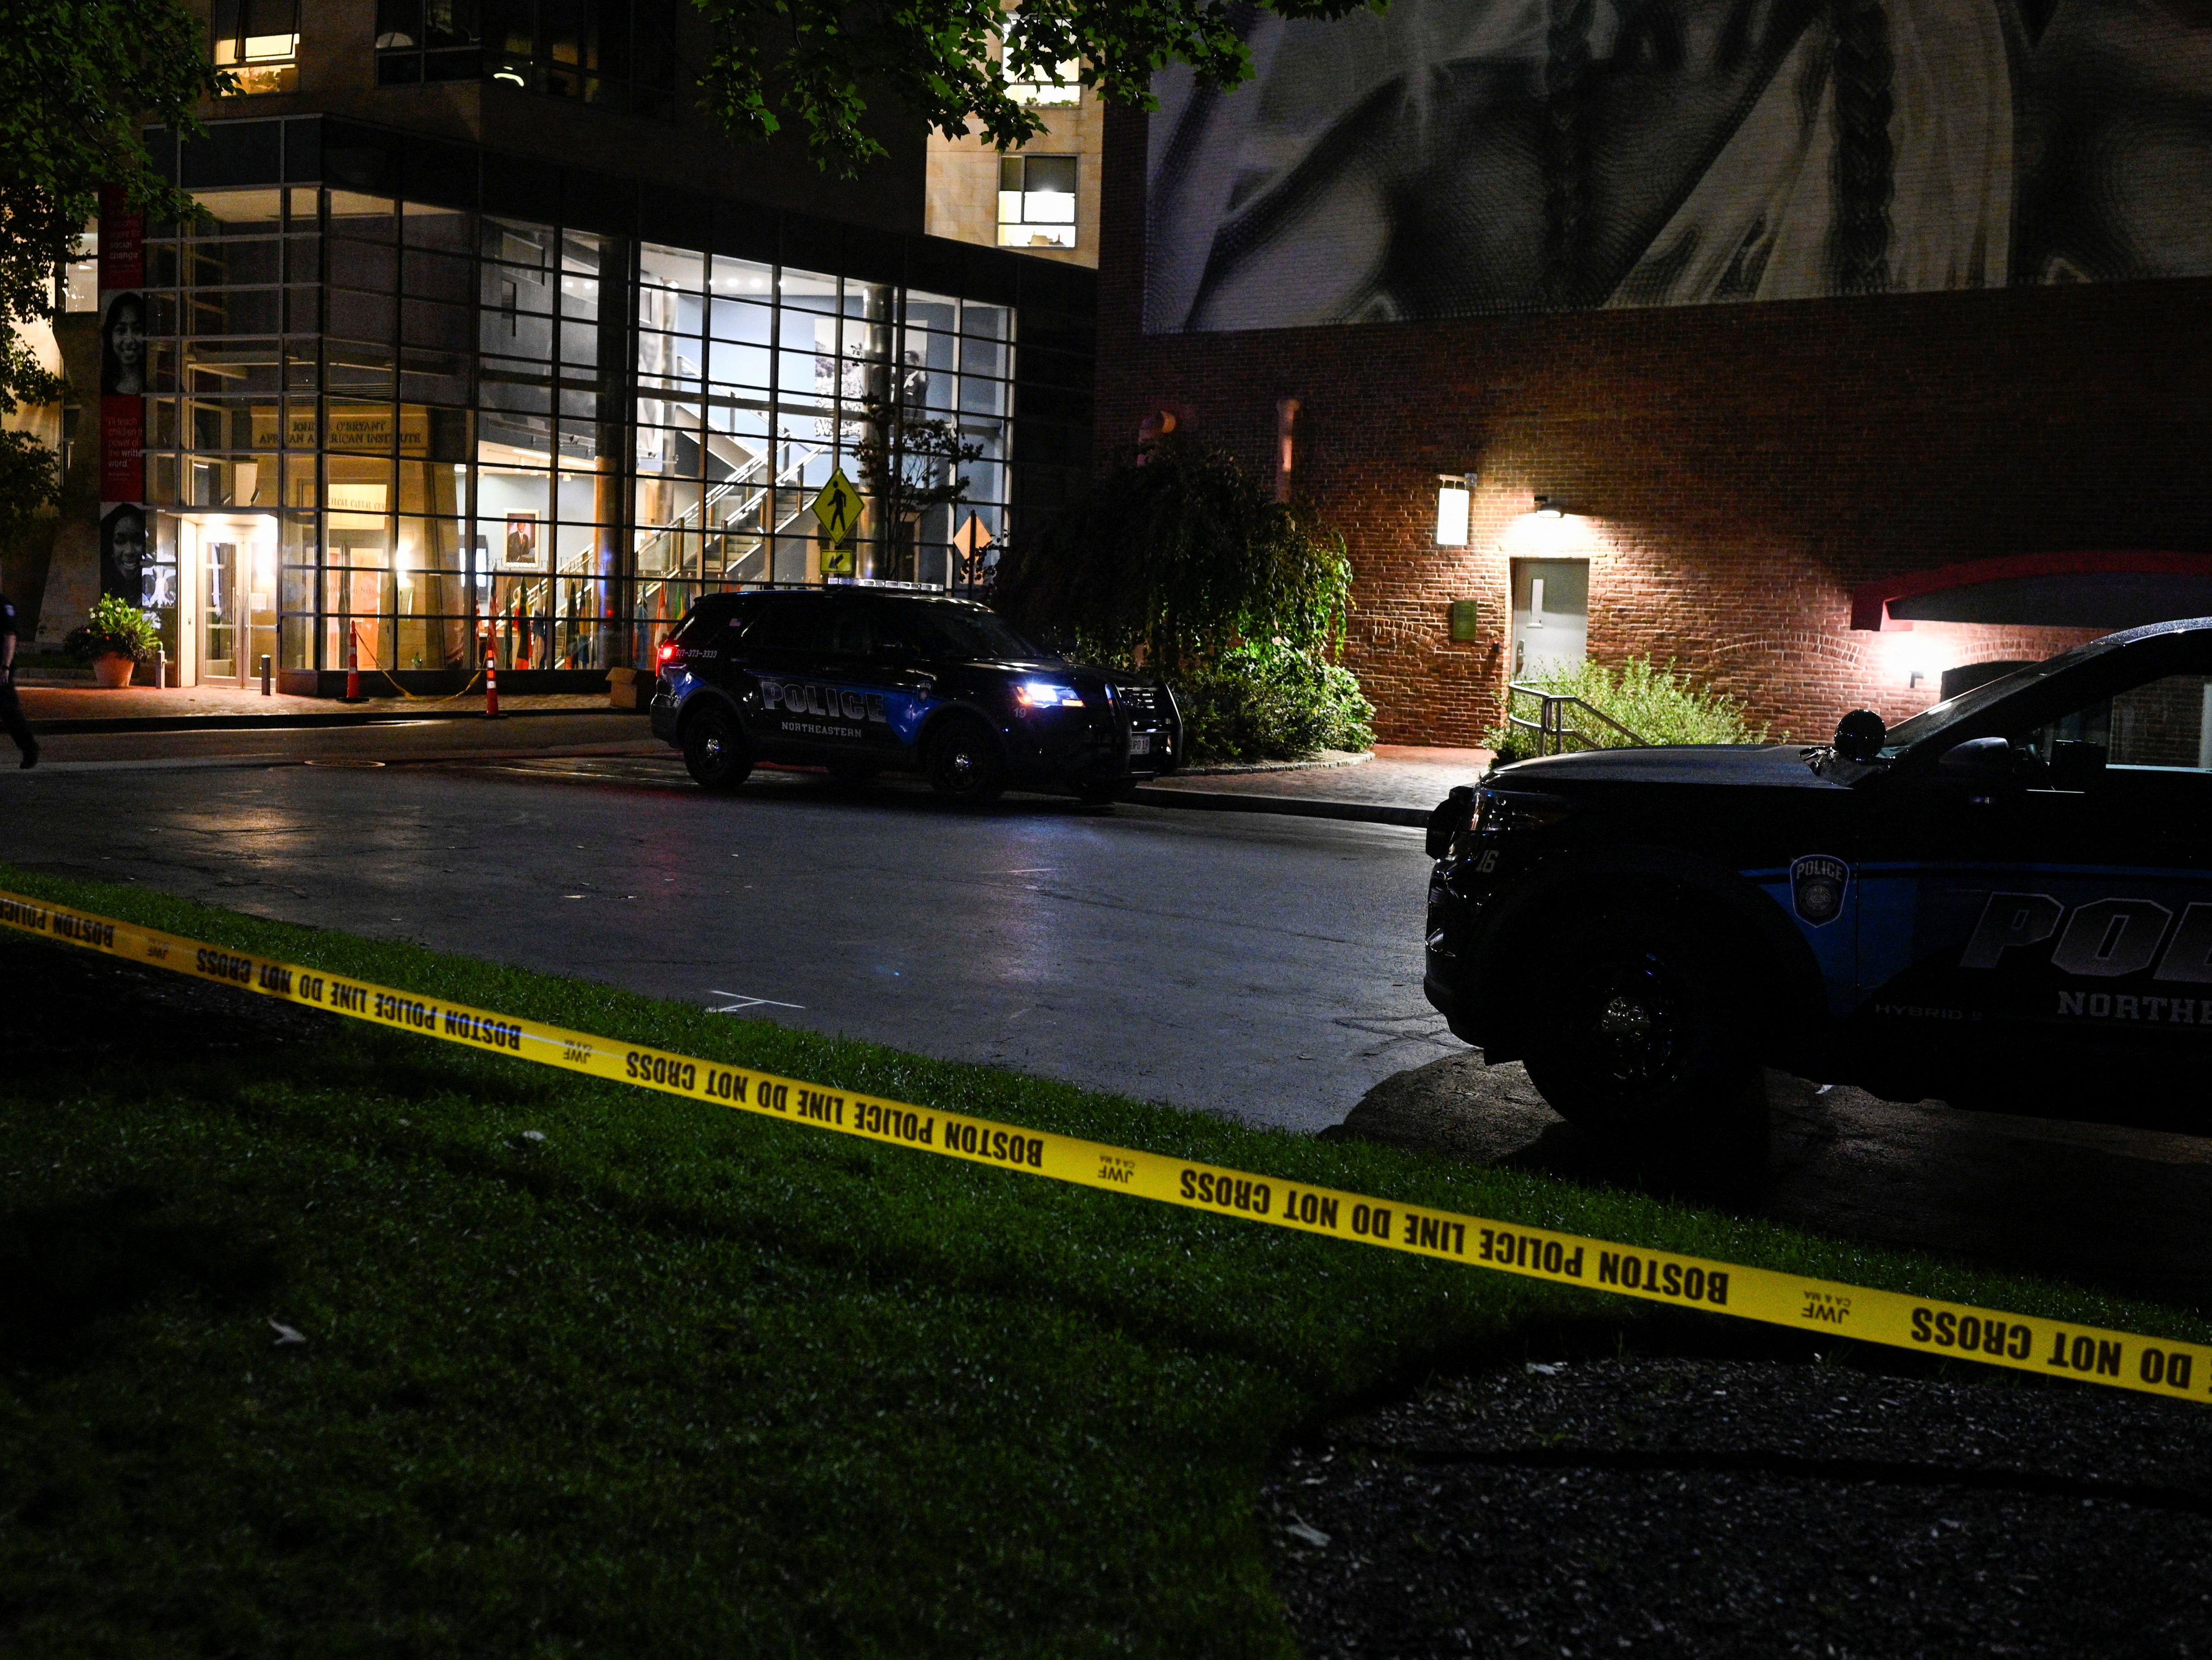 Boston Police Department’s Bomb Squad, Boston Emergency Management Services and other law enforcement agencies respond after a package delivered to Holmes Hall at Northeastern University exploded, in Boston, Massachusetts, U.S., September 13, 2022. REUTERS/Nicholas Pfosi